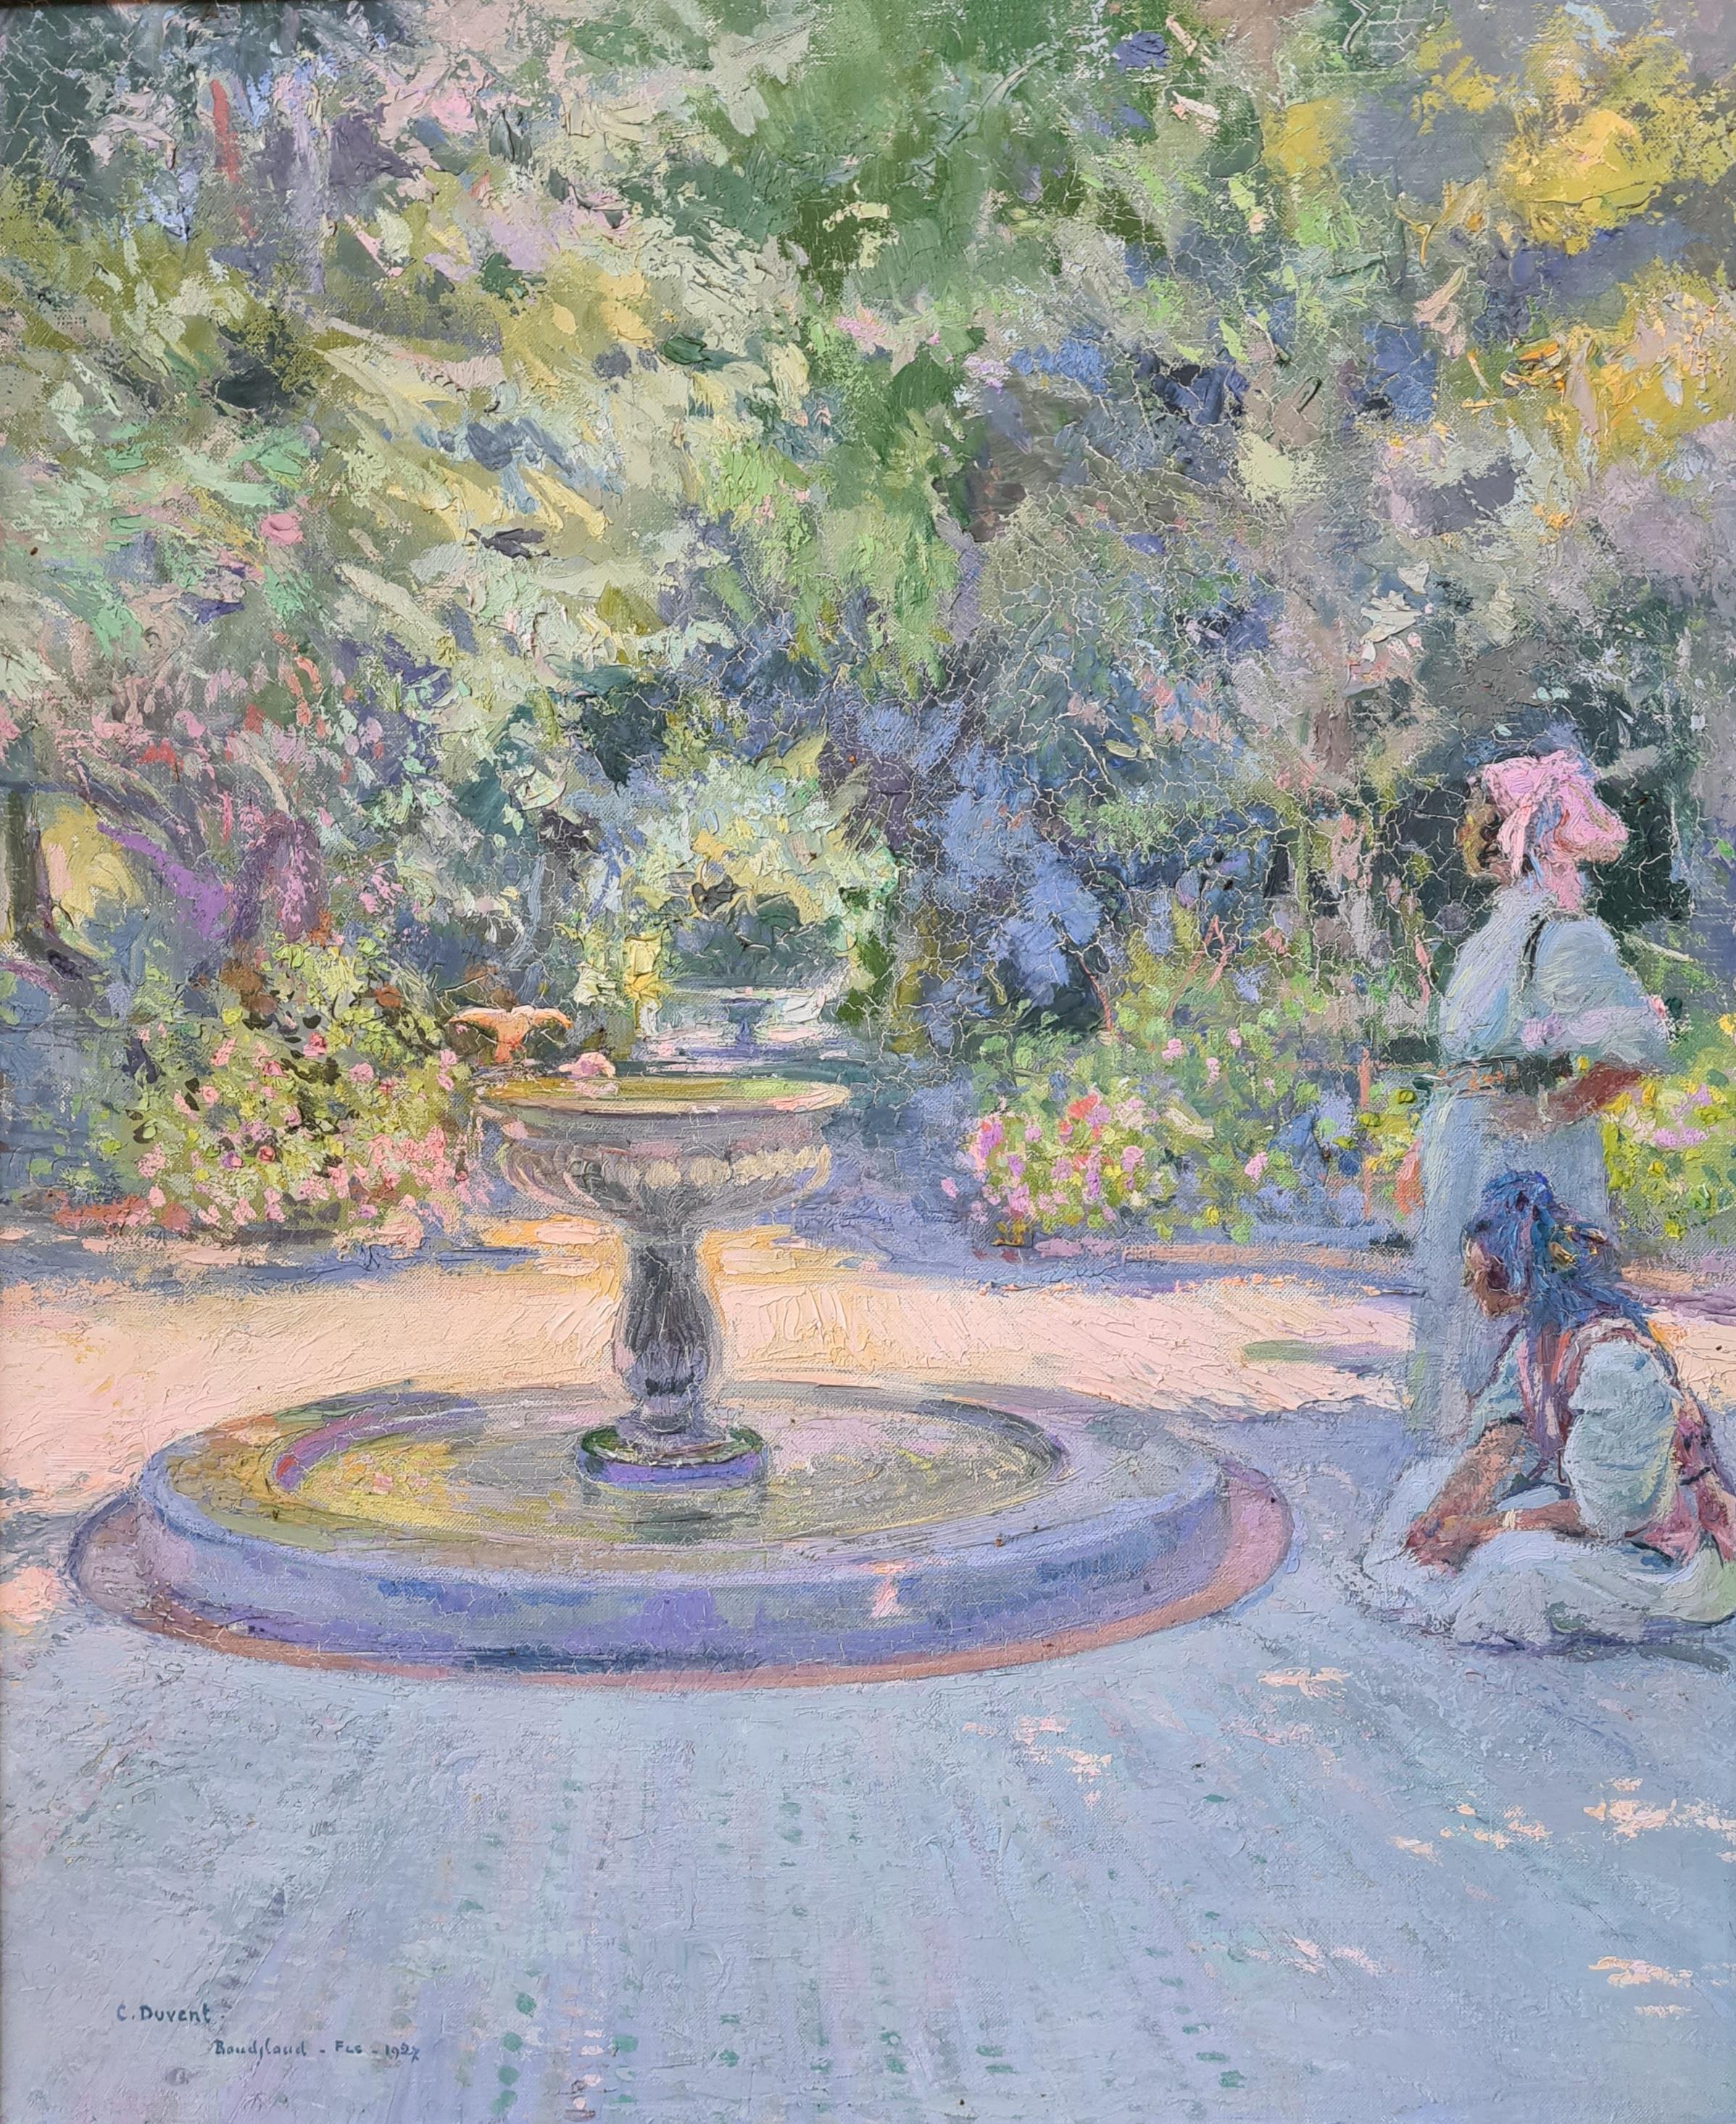 Charles Duvent Figurative Painting - Orientalist Garden, Boujloud, F�ès, Ladies at the Fountain. Oil on Canvas.